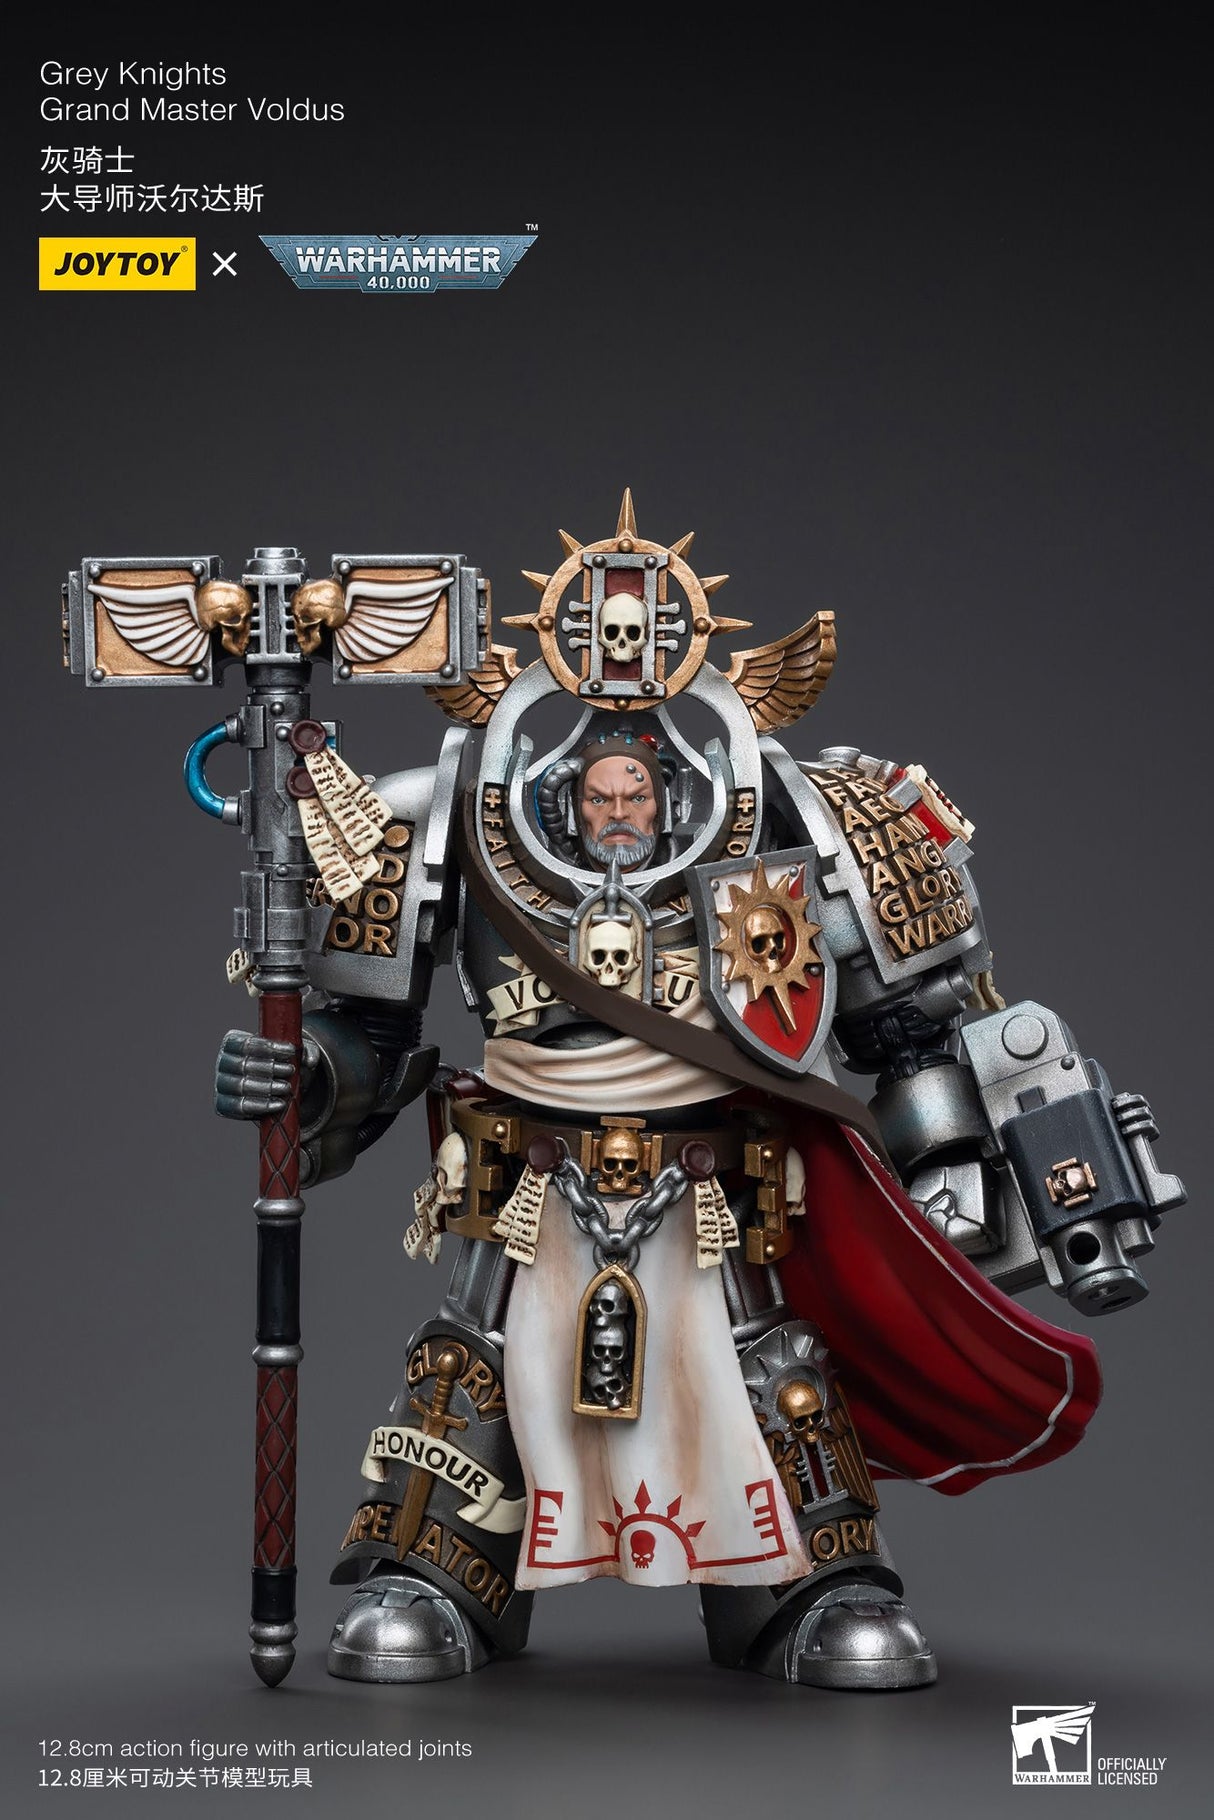 Warhammer Collectibles: 1/18 Scale Grey Knights Grand Master Voldus